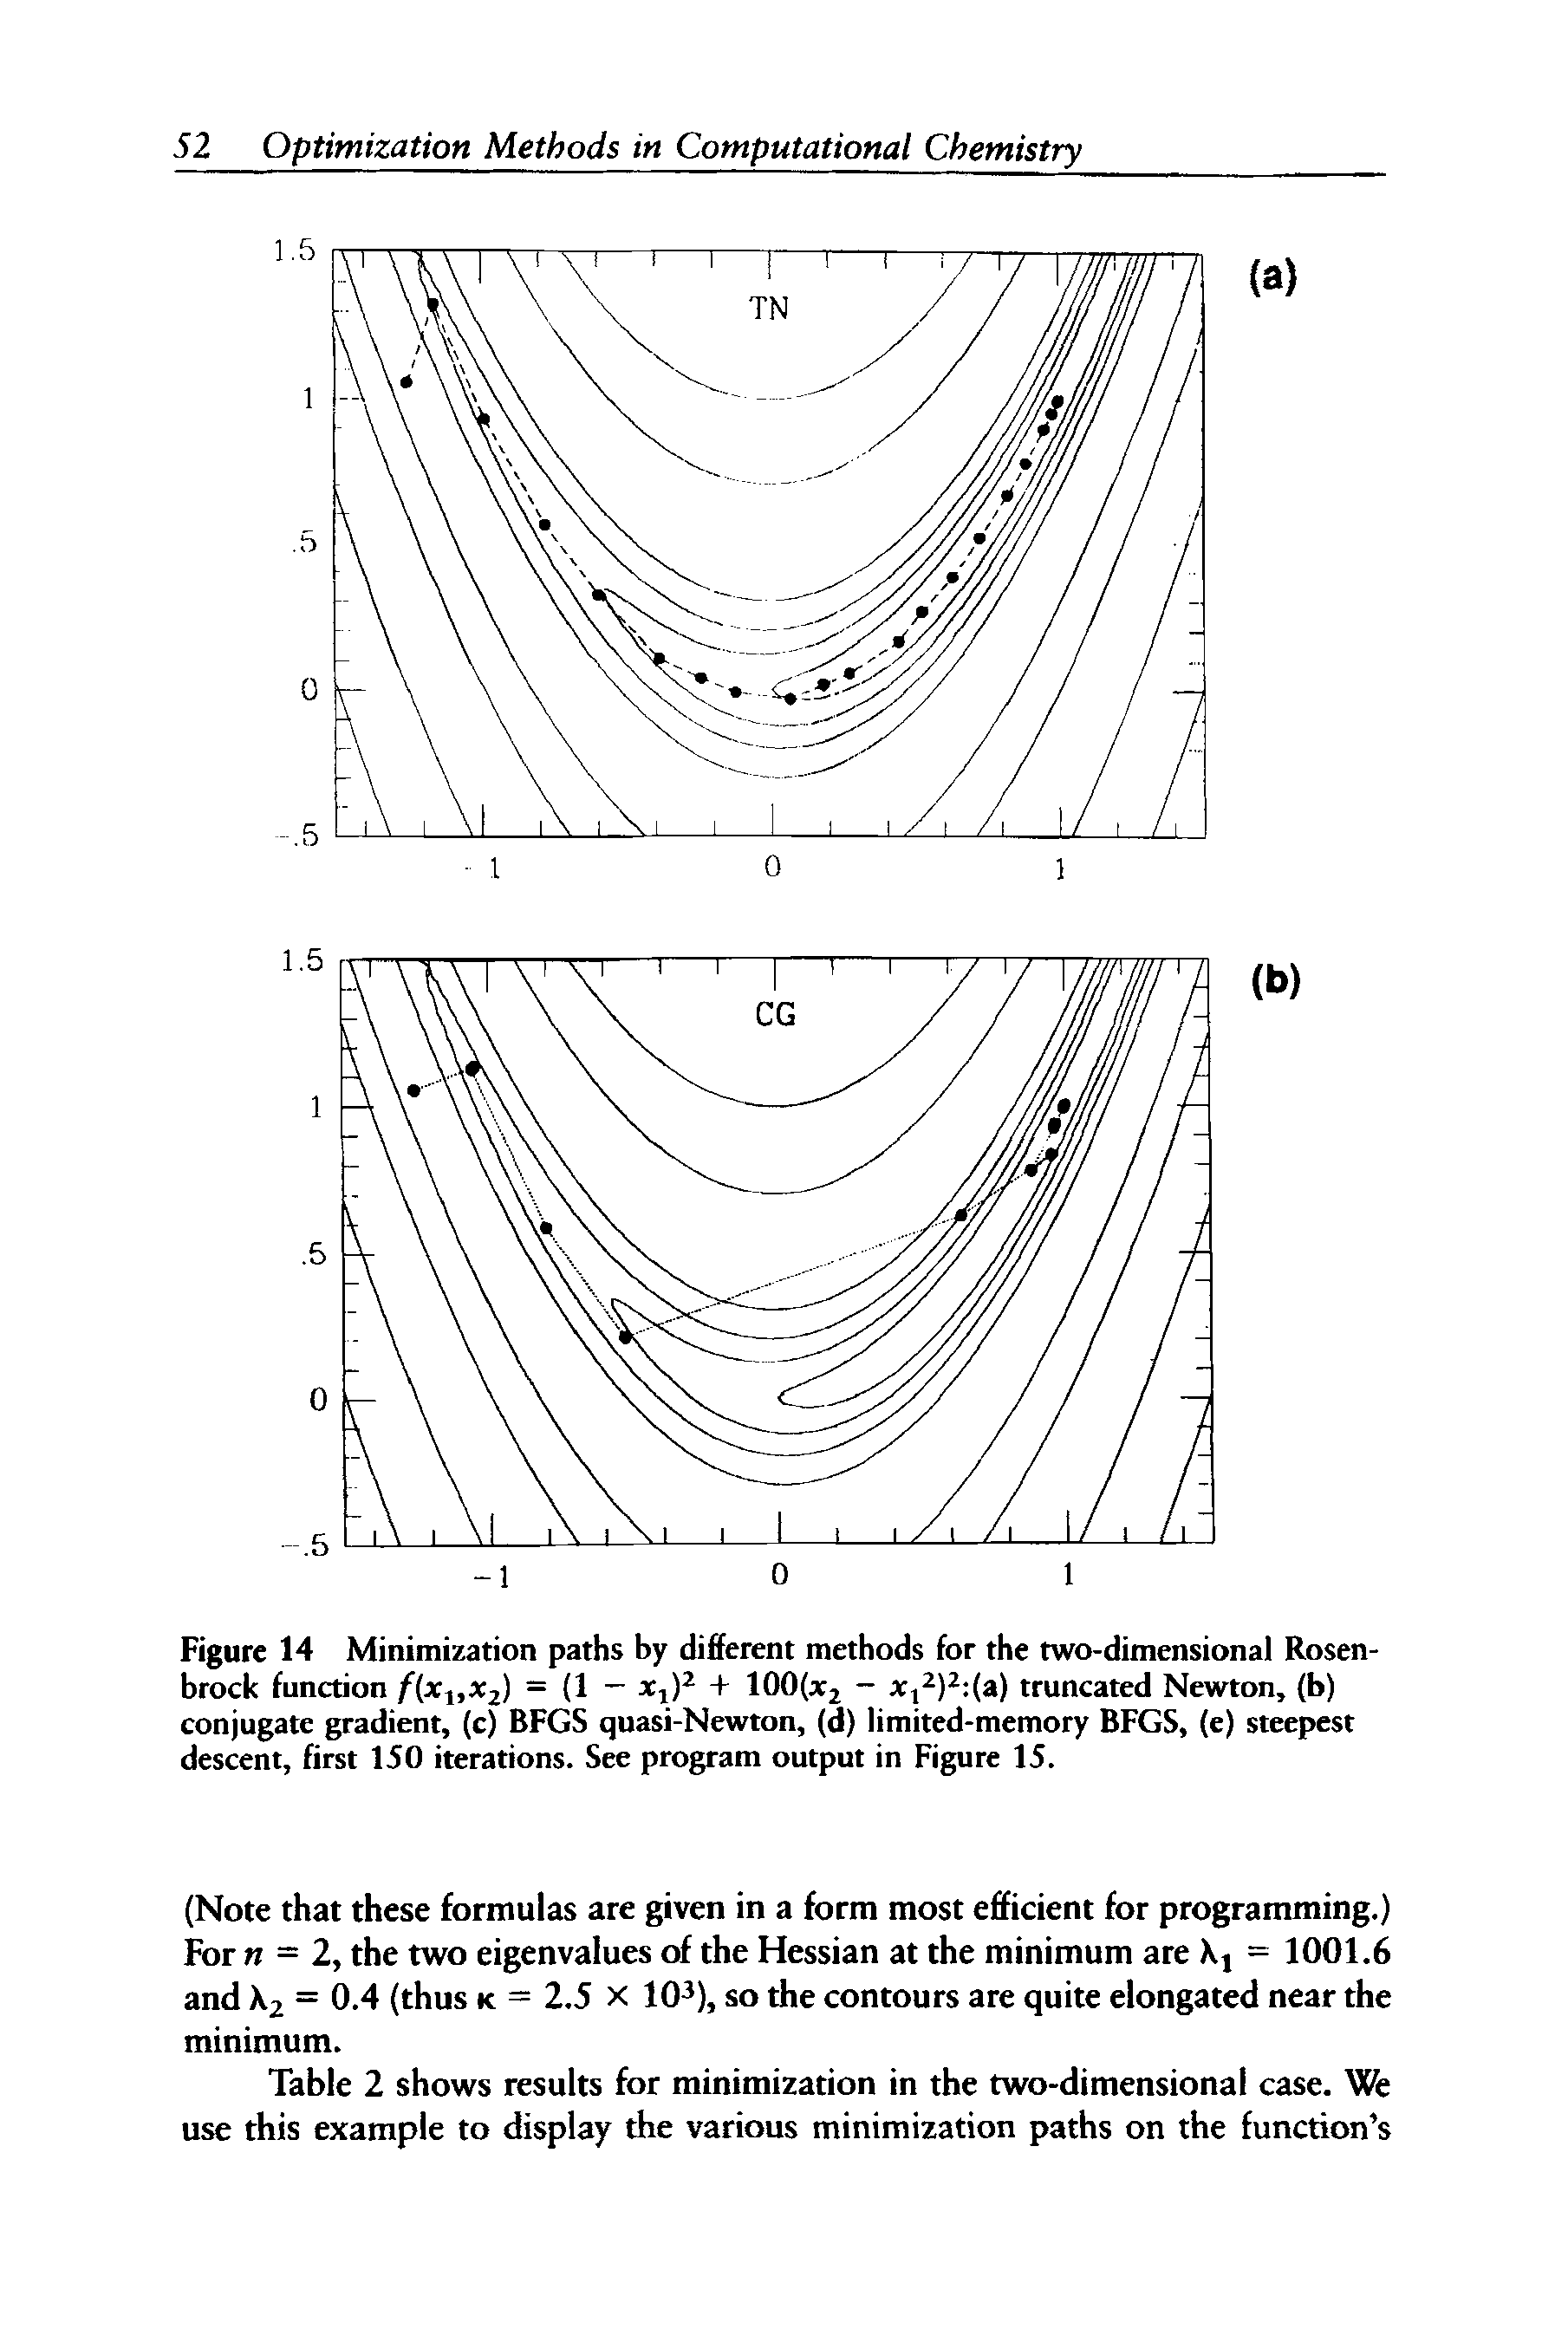 Figure 14 Minimization paths by different methods for the two-dimensional Rosen-brock function f(xx,x2) = (1 — x,)2 + 100(x2 - x,2)2 (a) truncated Newton, (b) conjugate gradient, (c) BFGS quasi-Newton, (d) limited-memory BFGS, (e) steepest descent, first 150 iterations. See program output in Figure 15.